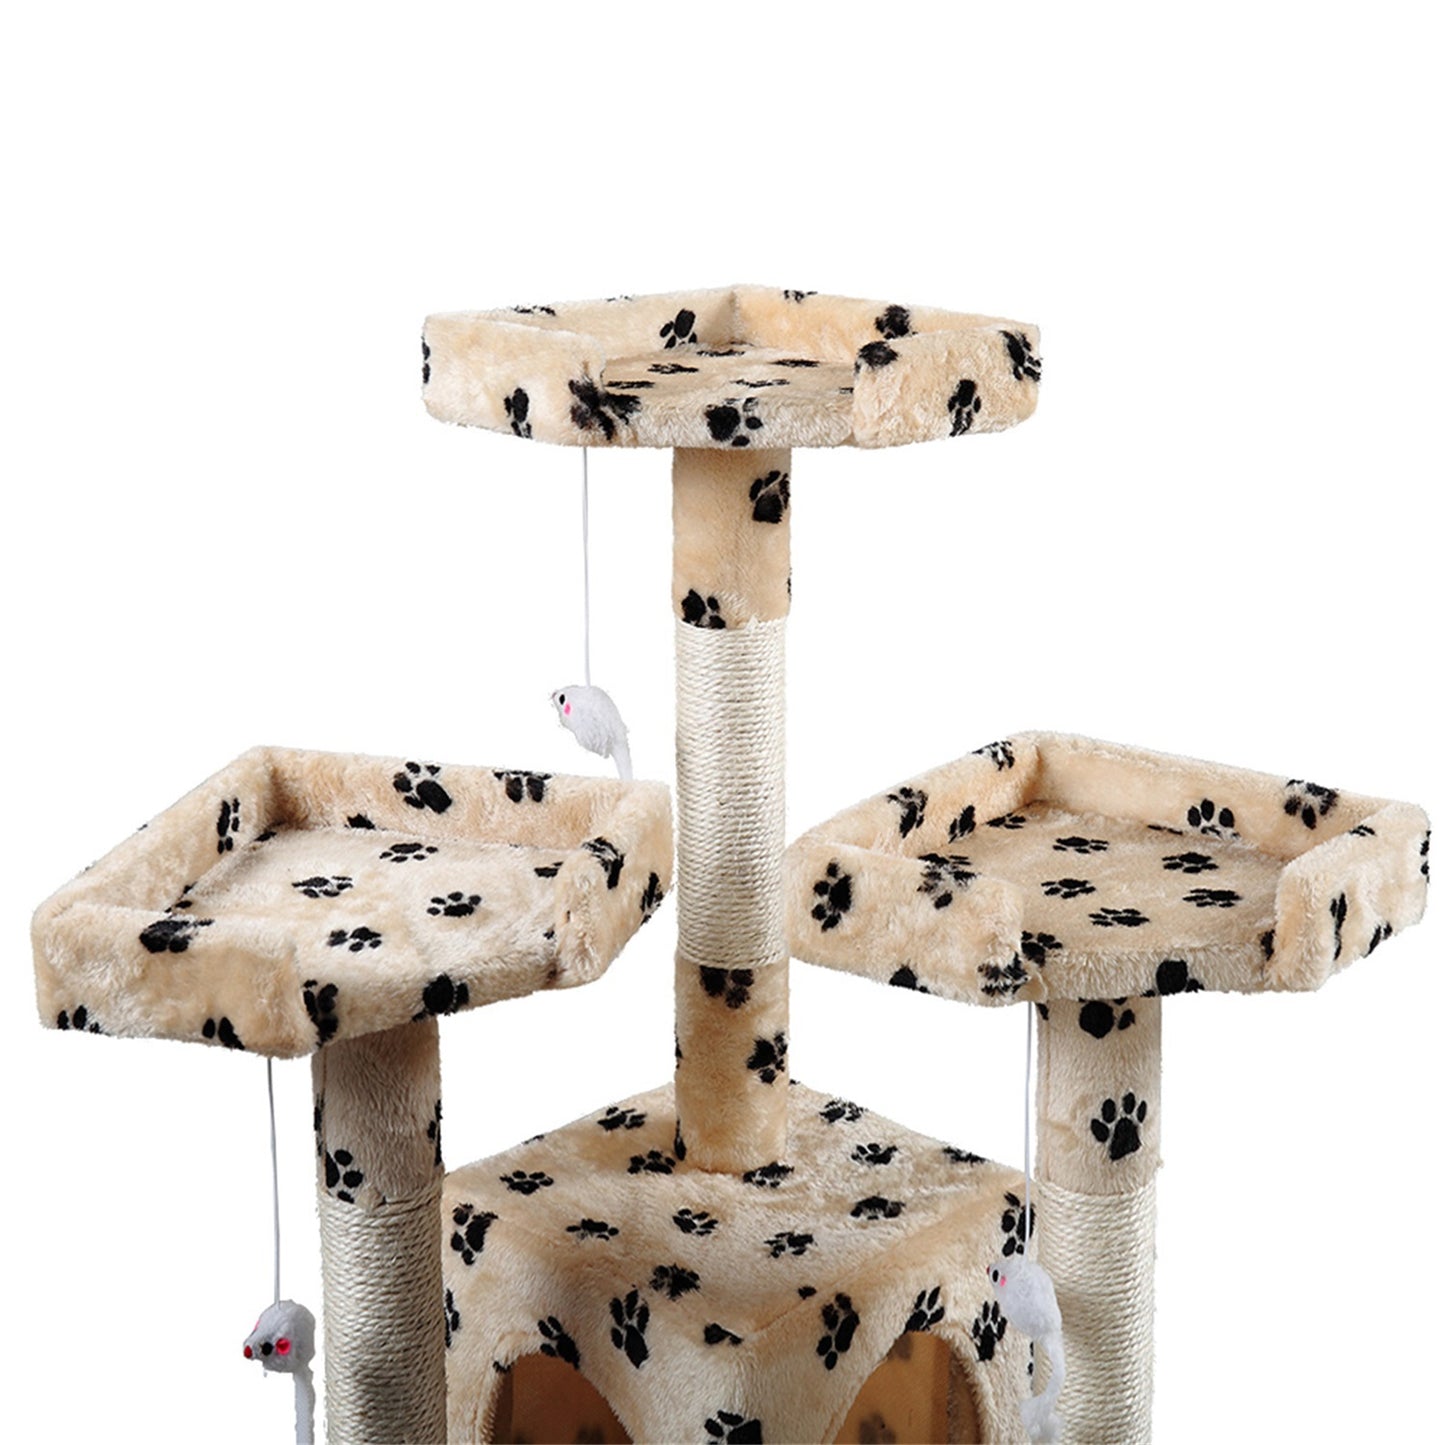 Pefilos Pet Furniture for Cats and Kittens - Cat Tower for Indoor Cats Tall Cat Tree for Big Cats Tiger Tough Cat Tree Tower Interactive Playground, Gray